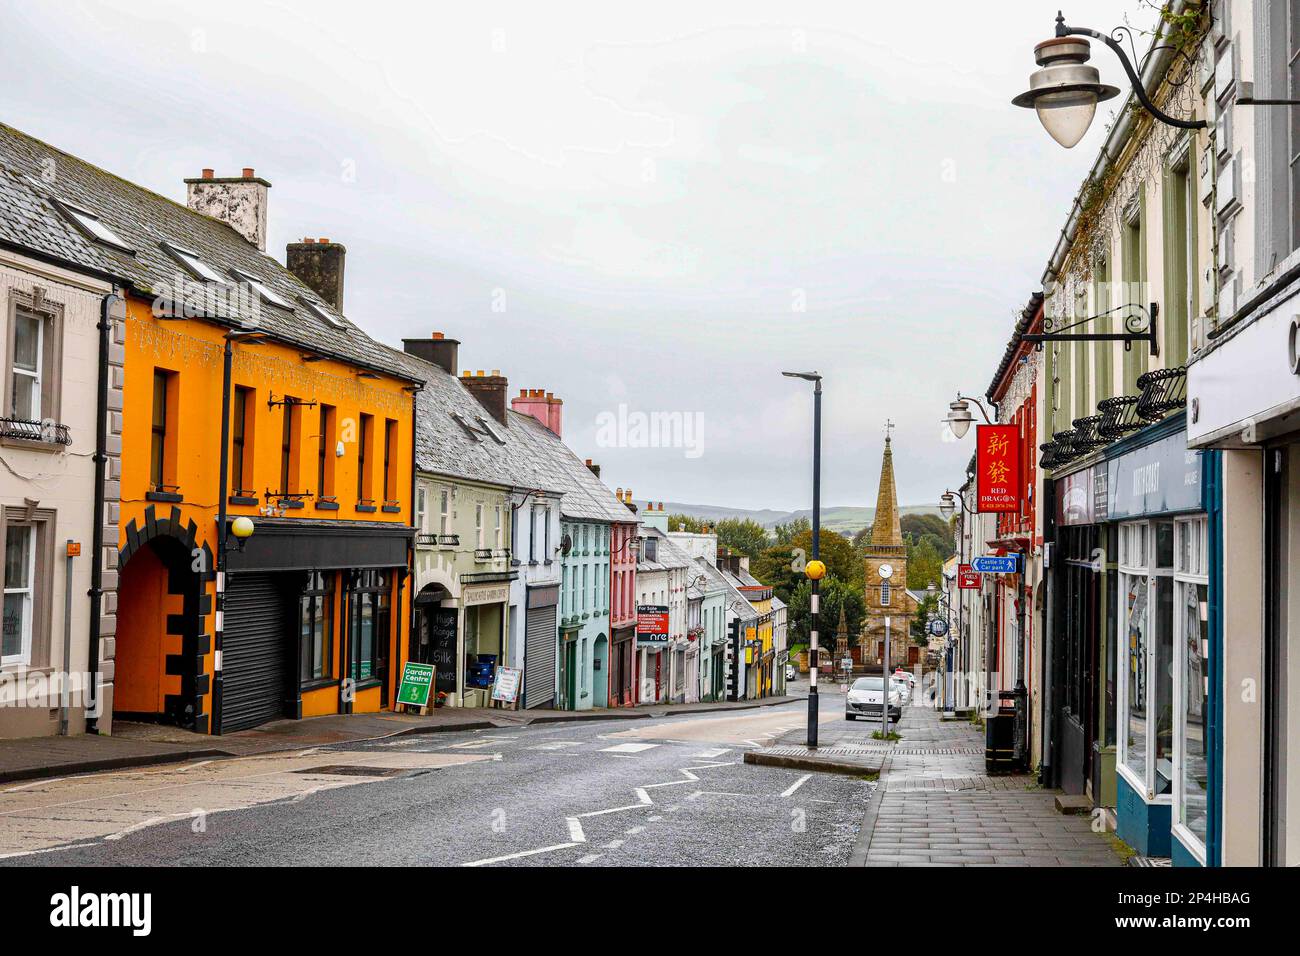 Shops line town in Ireland Stock Photo